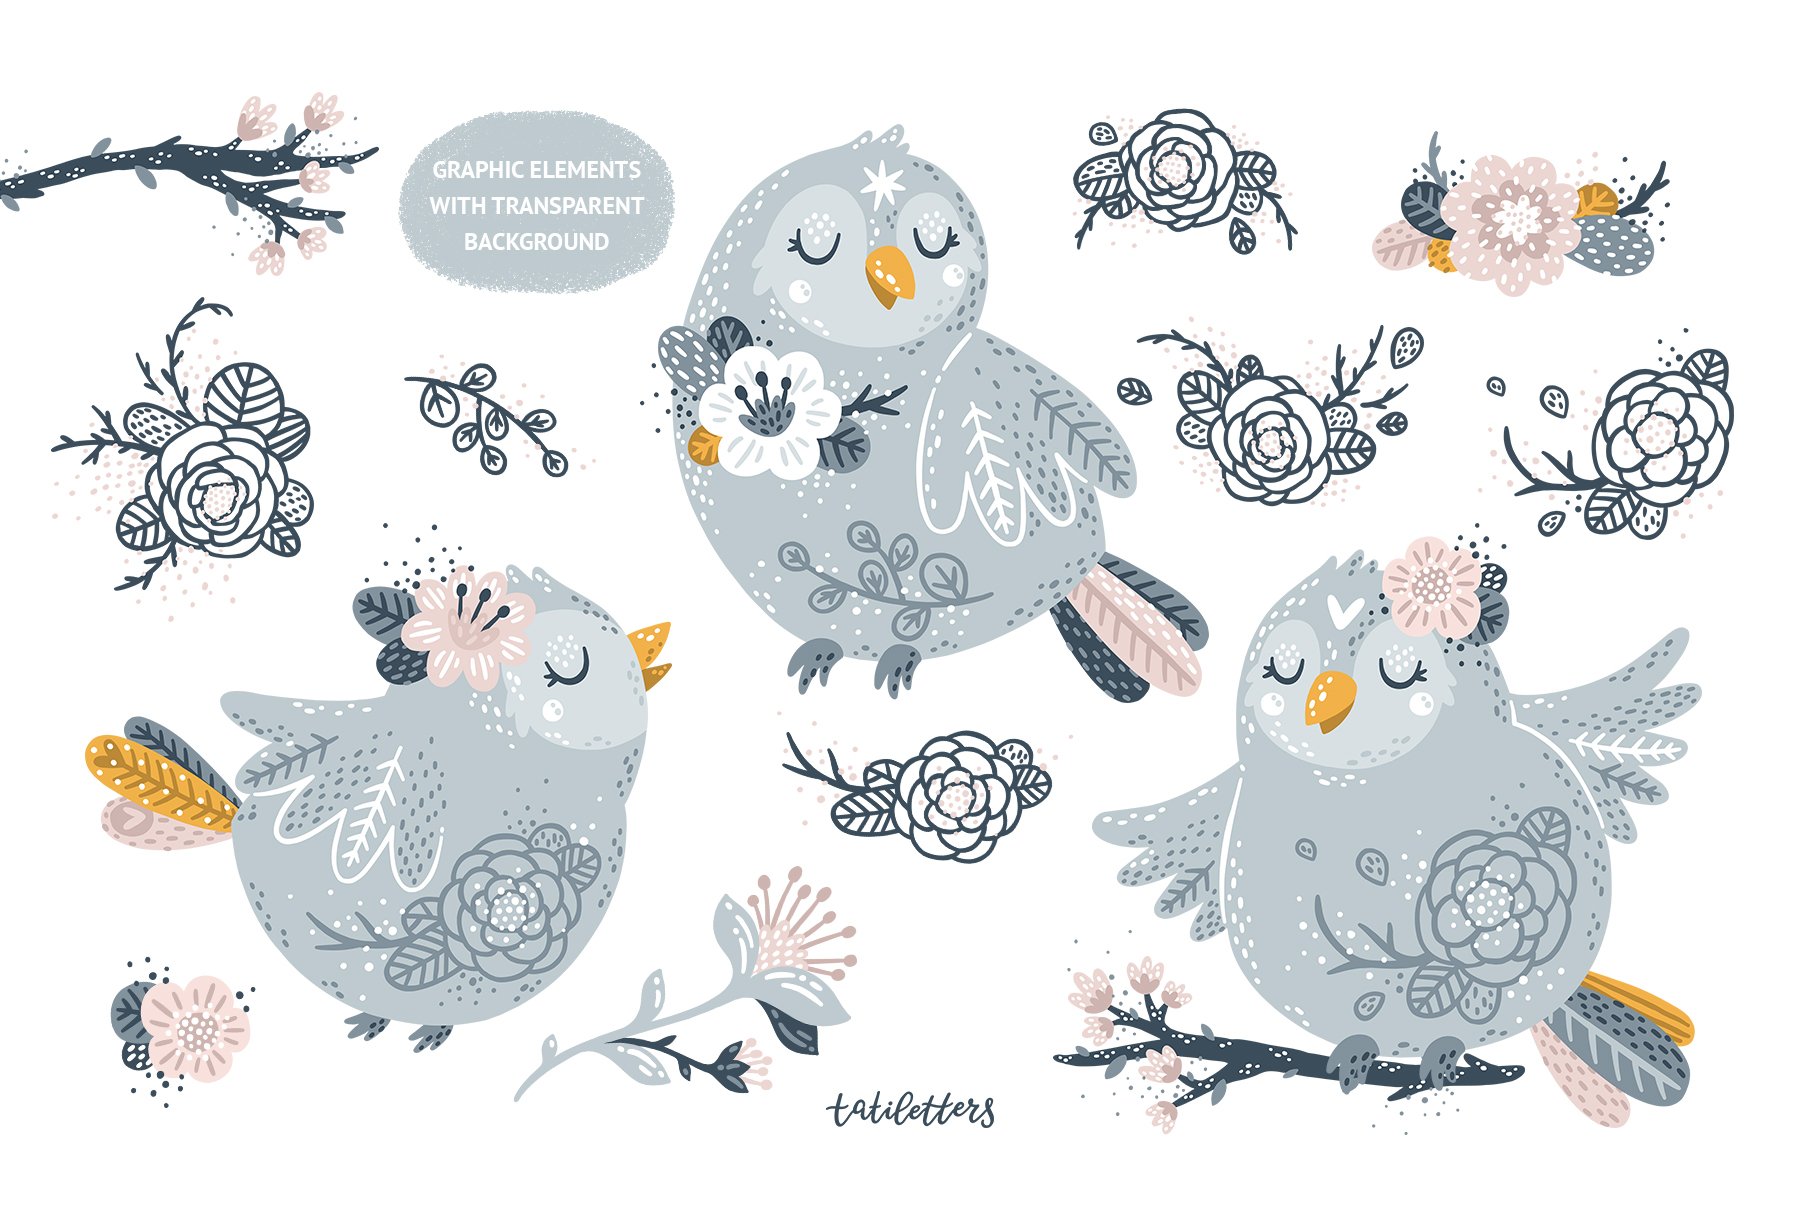 Birds and Flowers Prints & Patterns